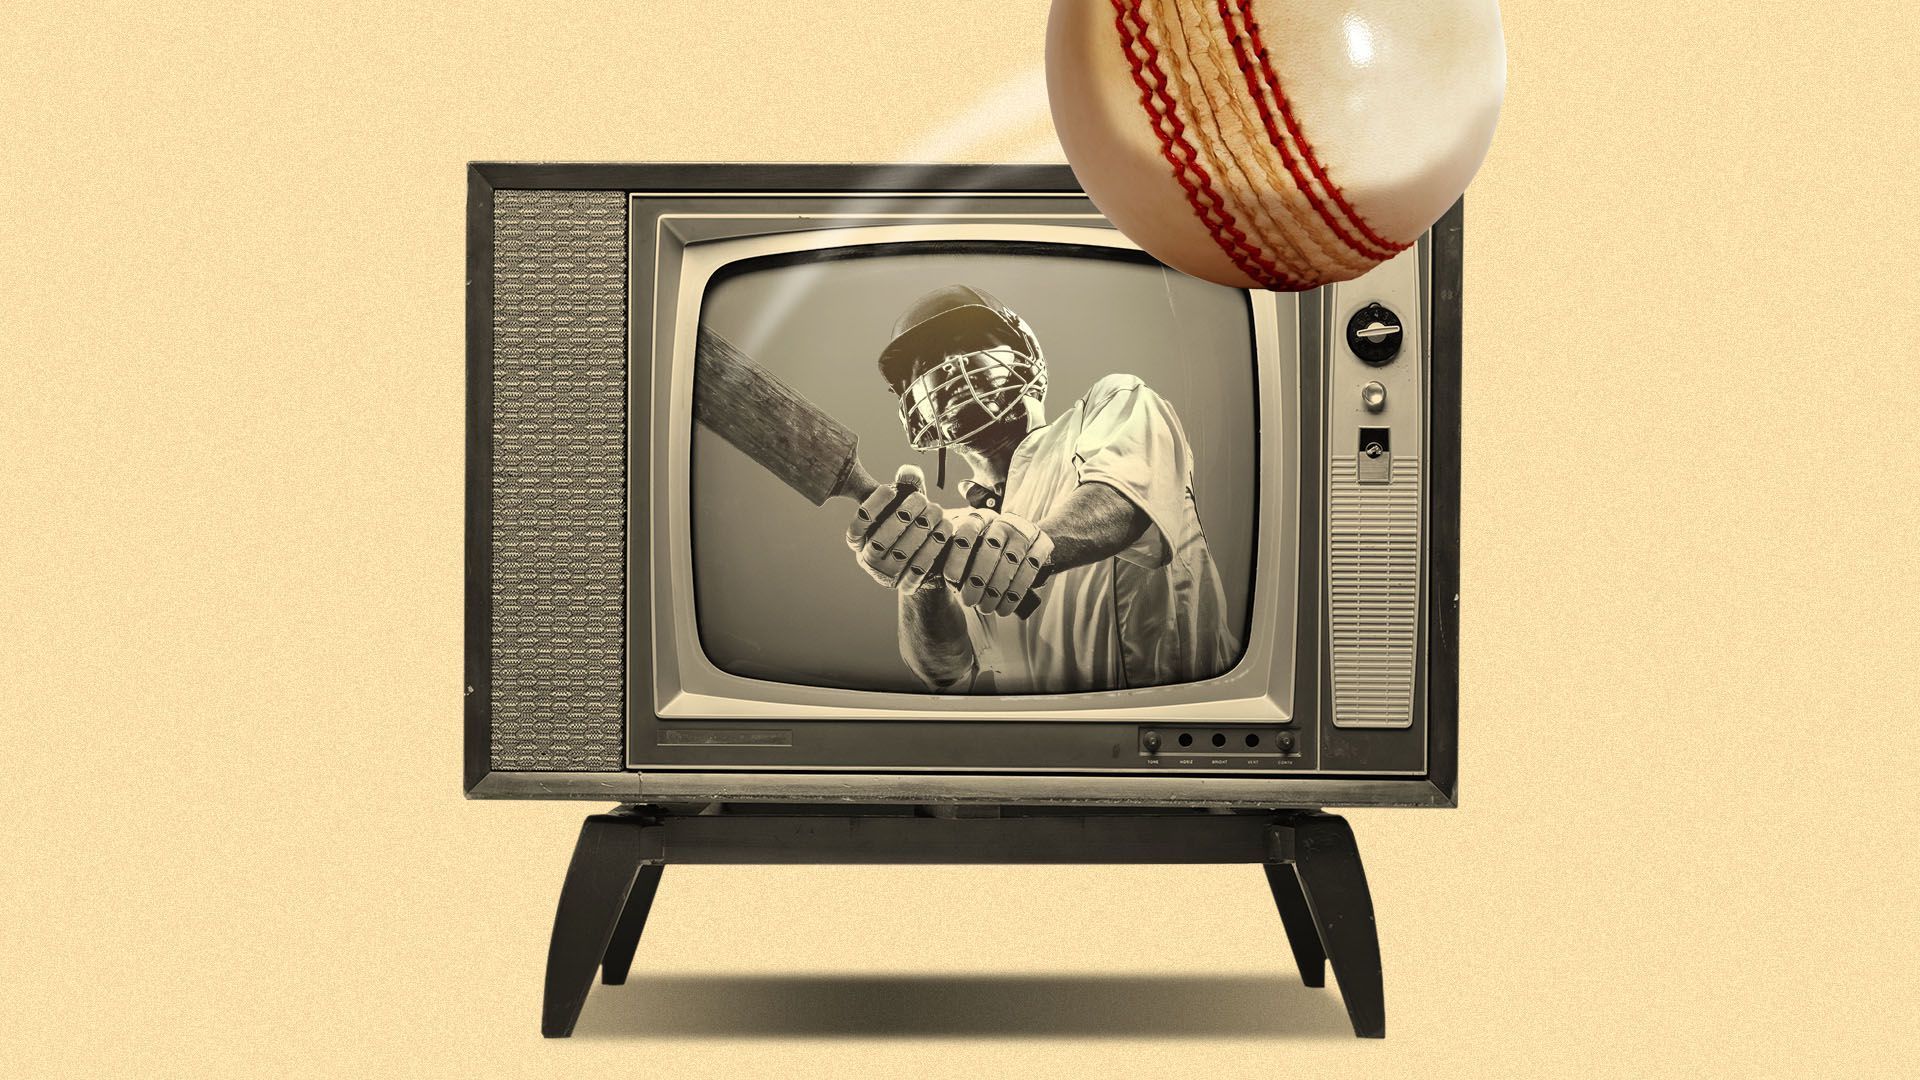 Illustration of a person playing cricket on a TV.